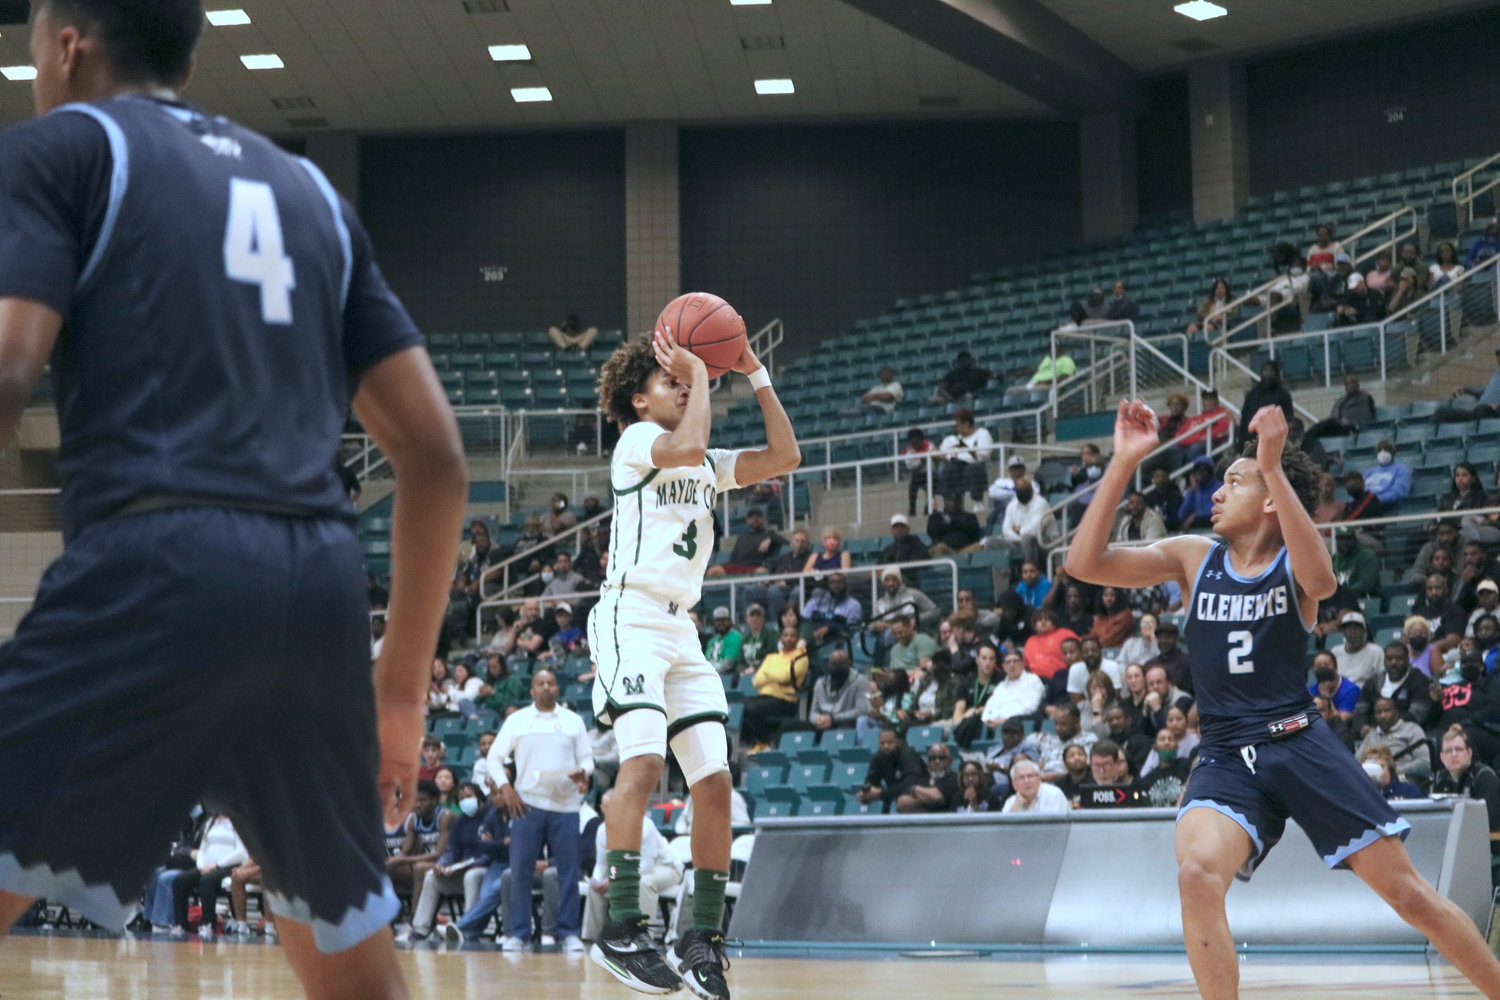 Christian Jones takes a jumper during Tuesday’s Class 6A regional quarterfinal between Mayde Creek and Fort Bend Clements at the Merrell Center.